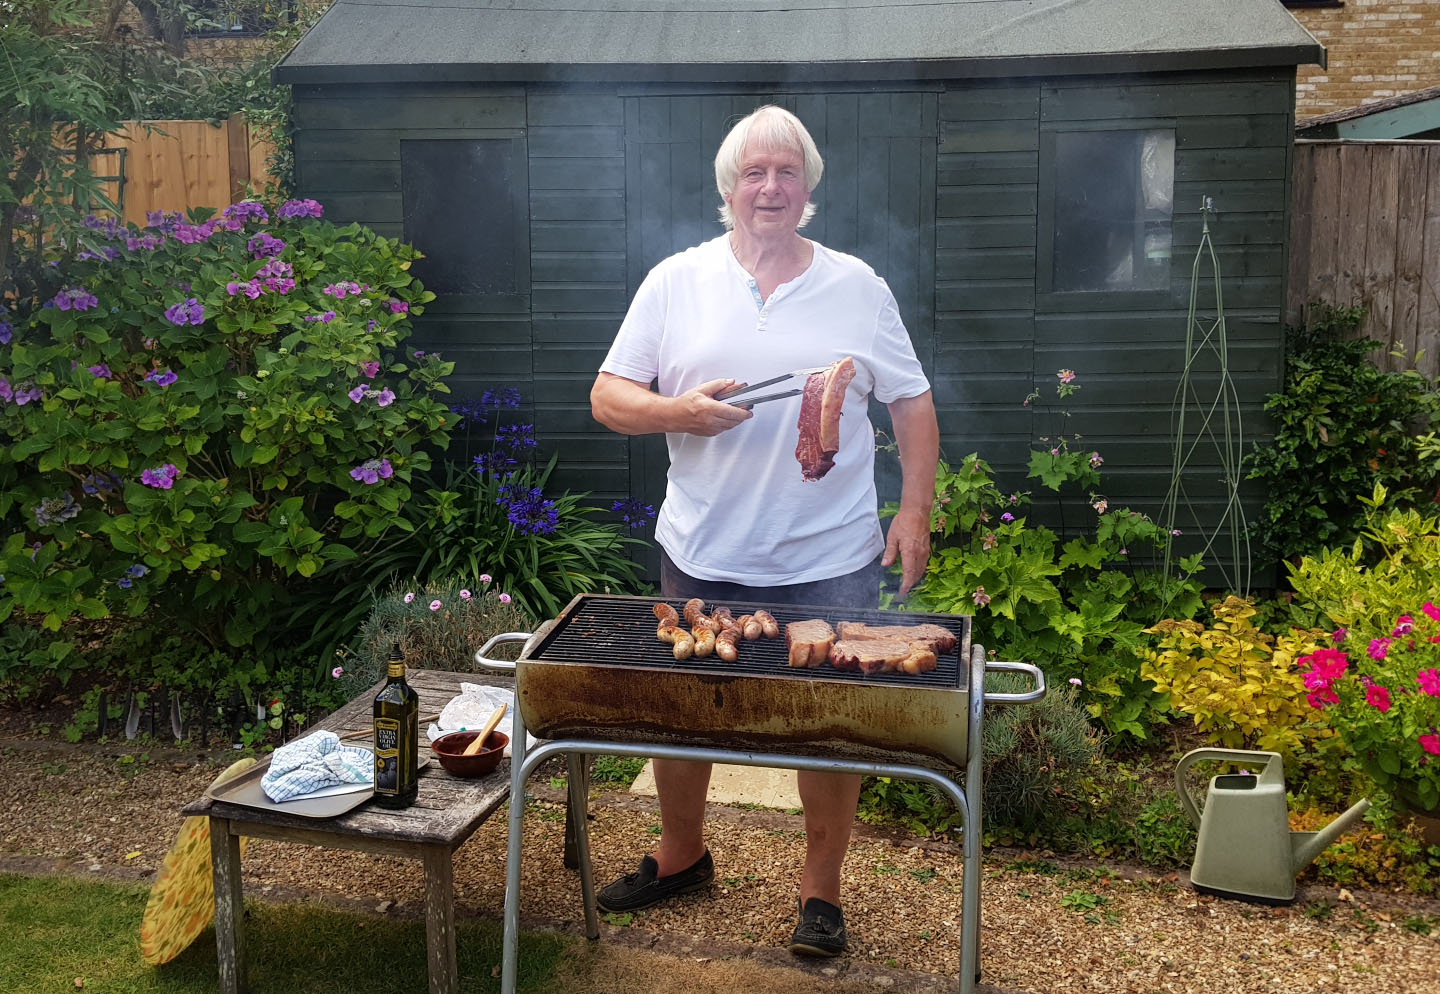 Another BBQ at Halfpenny Close